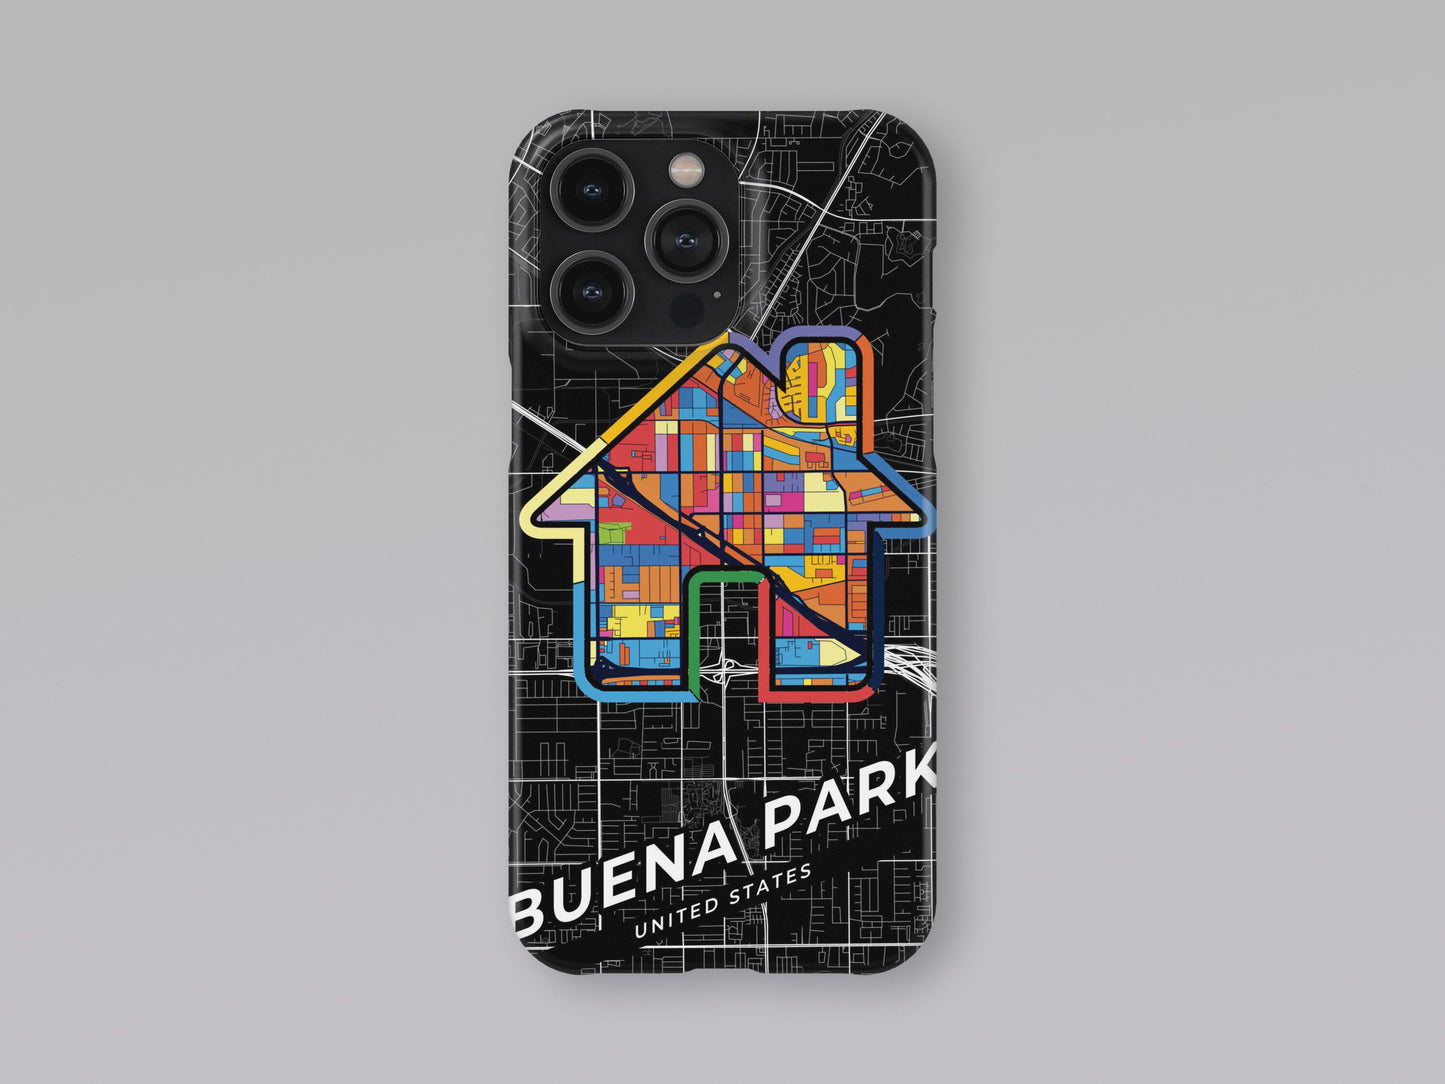 Buena Park California slim phone case with colorful icon. Birthday, wedding or housewarming gift. Couple match cases. 3